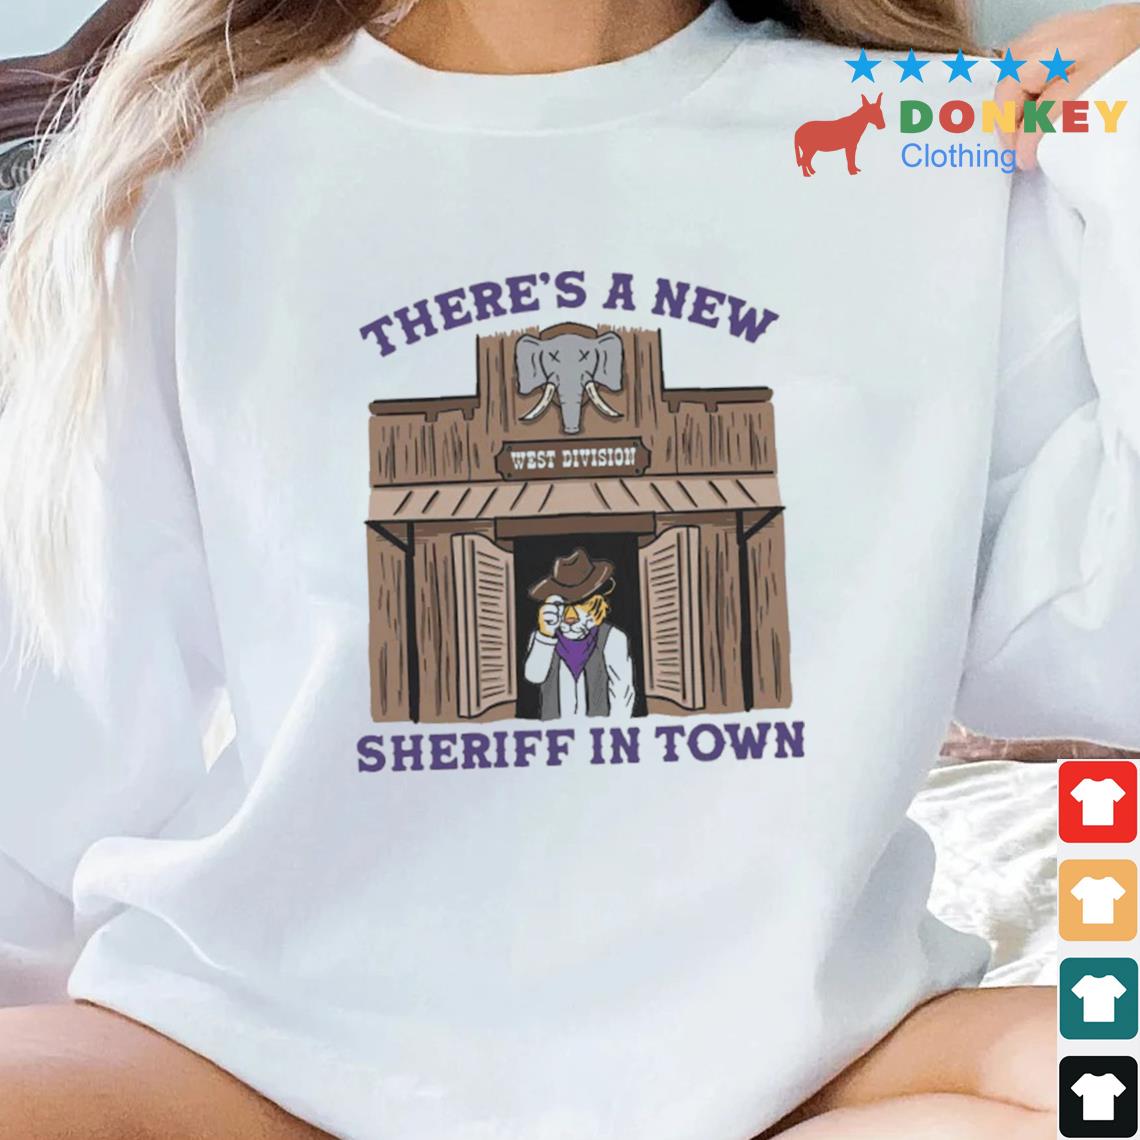 Alabama Vs LSU Tigers There's A New Sheriff In Town West Division Shirt